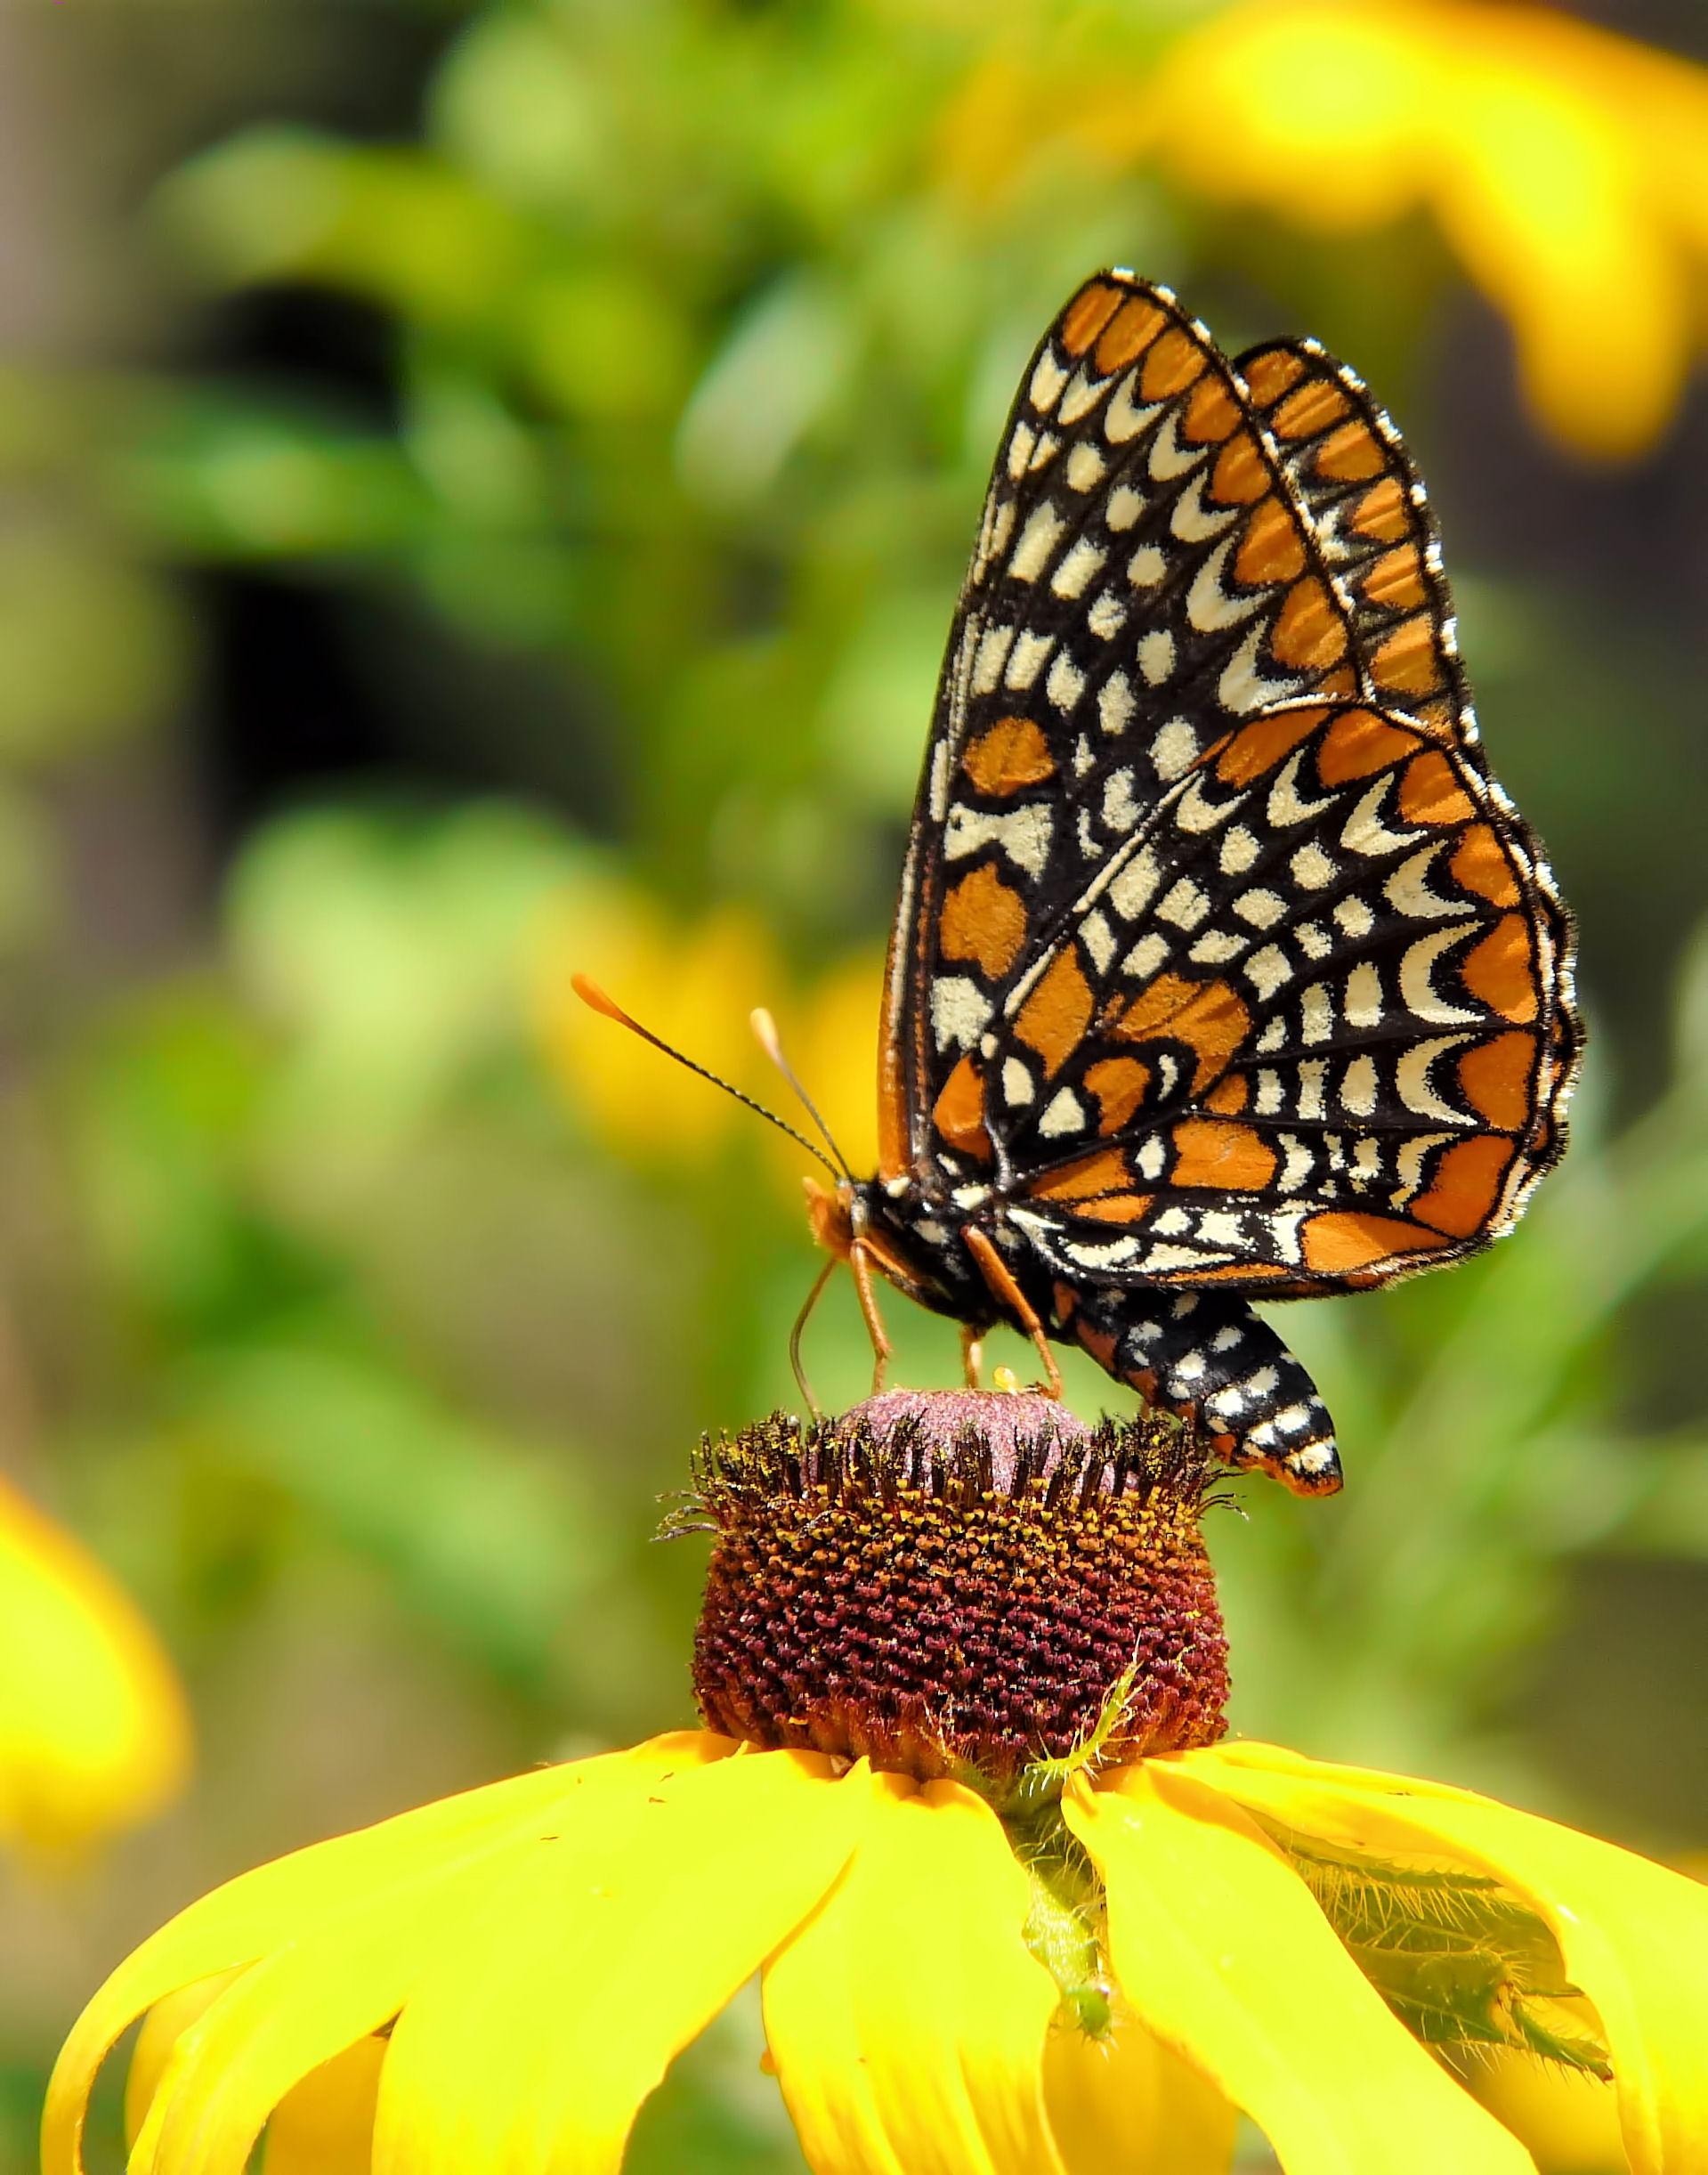 The Harmful Effect of Herbicides on the Habitat of Monarch Butterflies